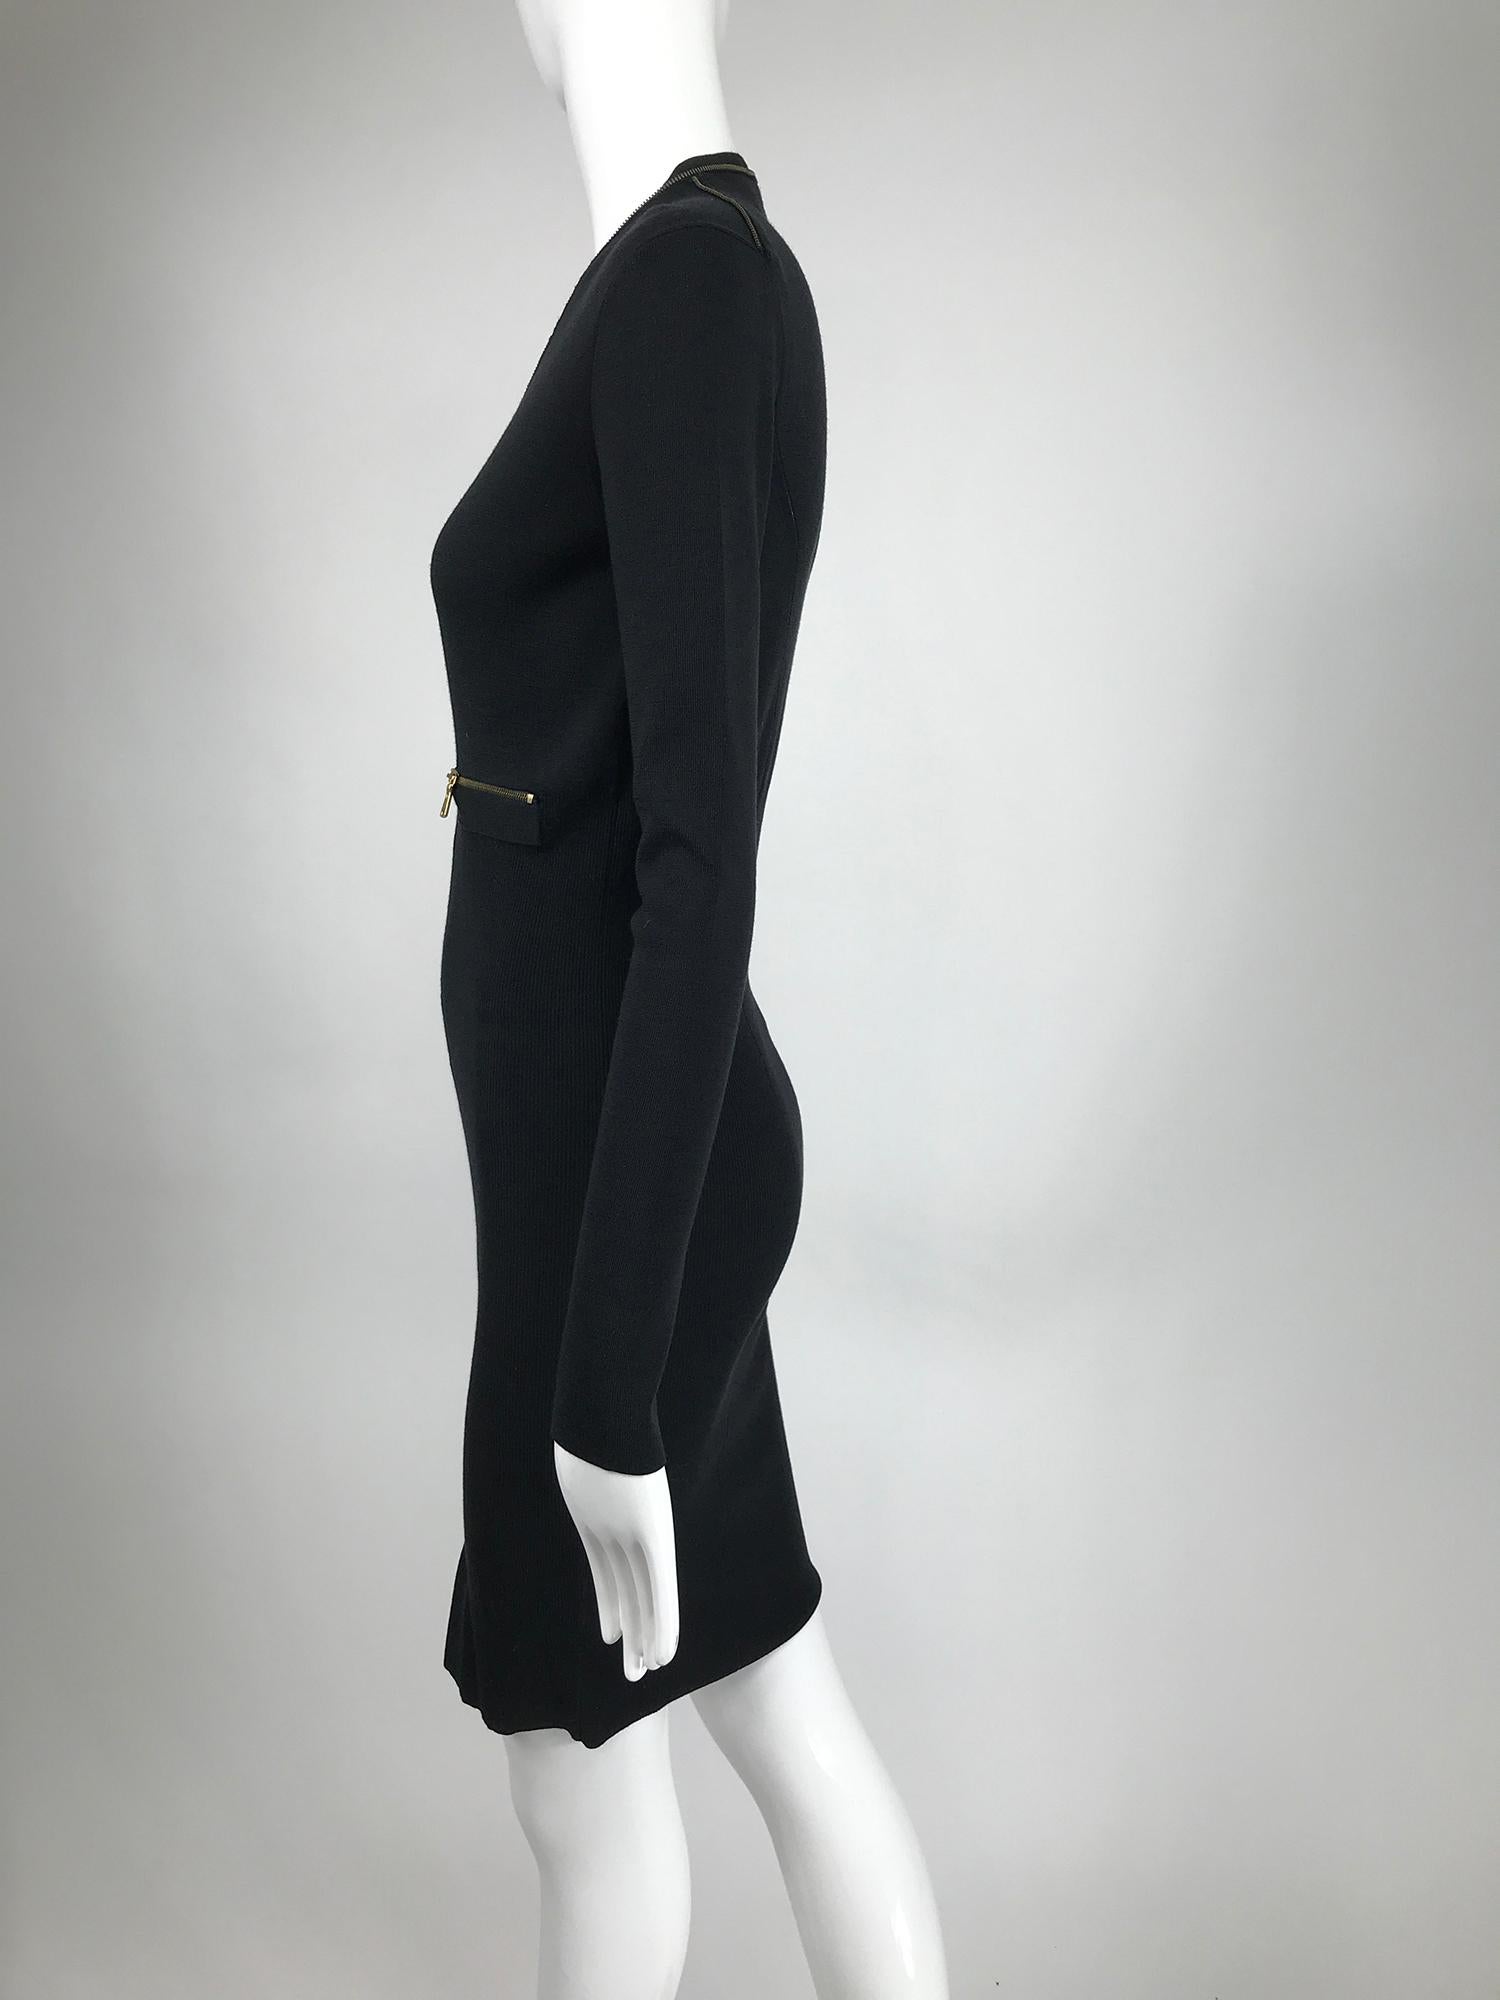 Yves Saint Laurent Autumn/Winter 2008 Ribbed Wool Zipper Front Body Con Dress In Excellent Condition In West Palm Beach, FL